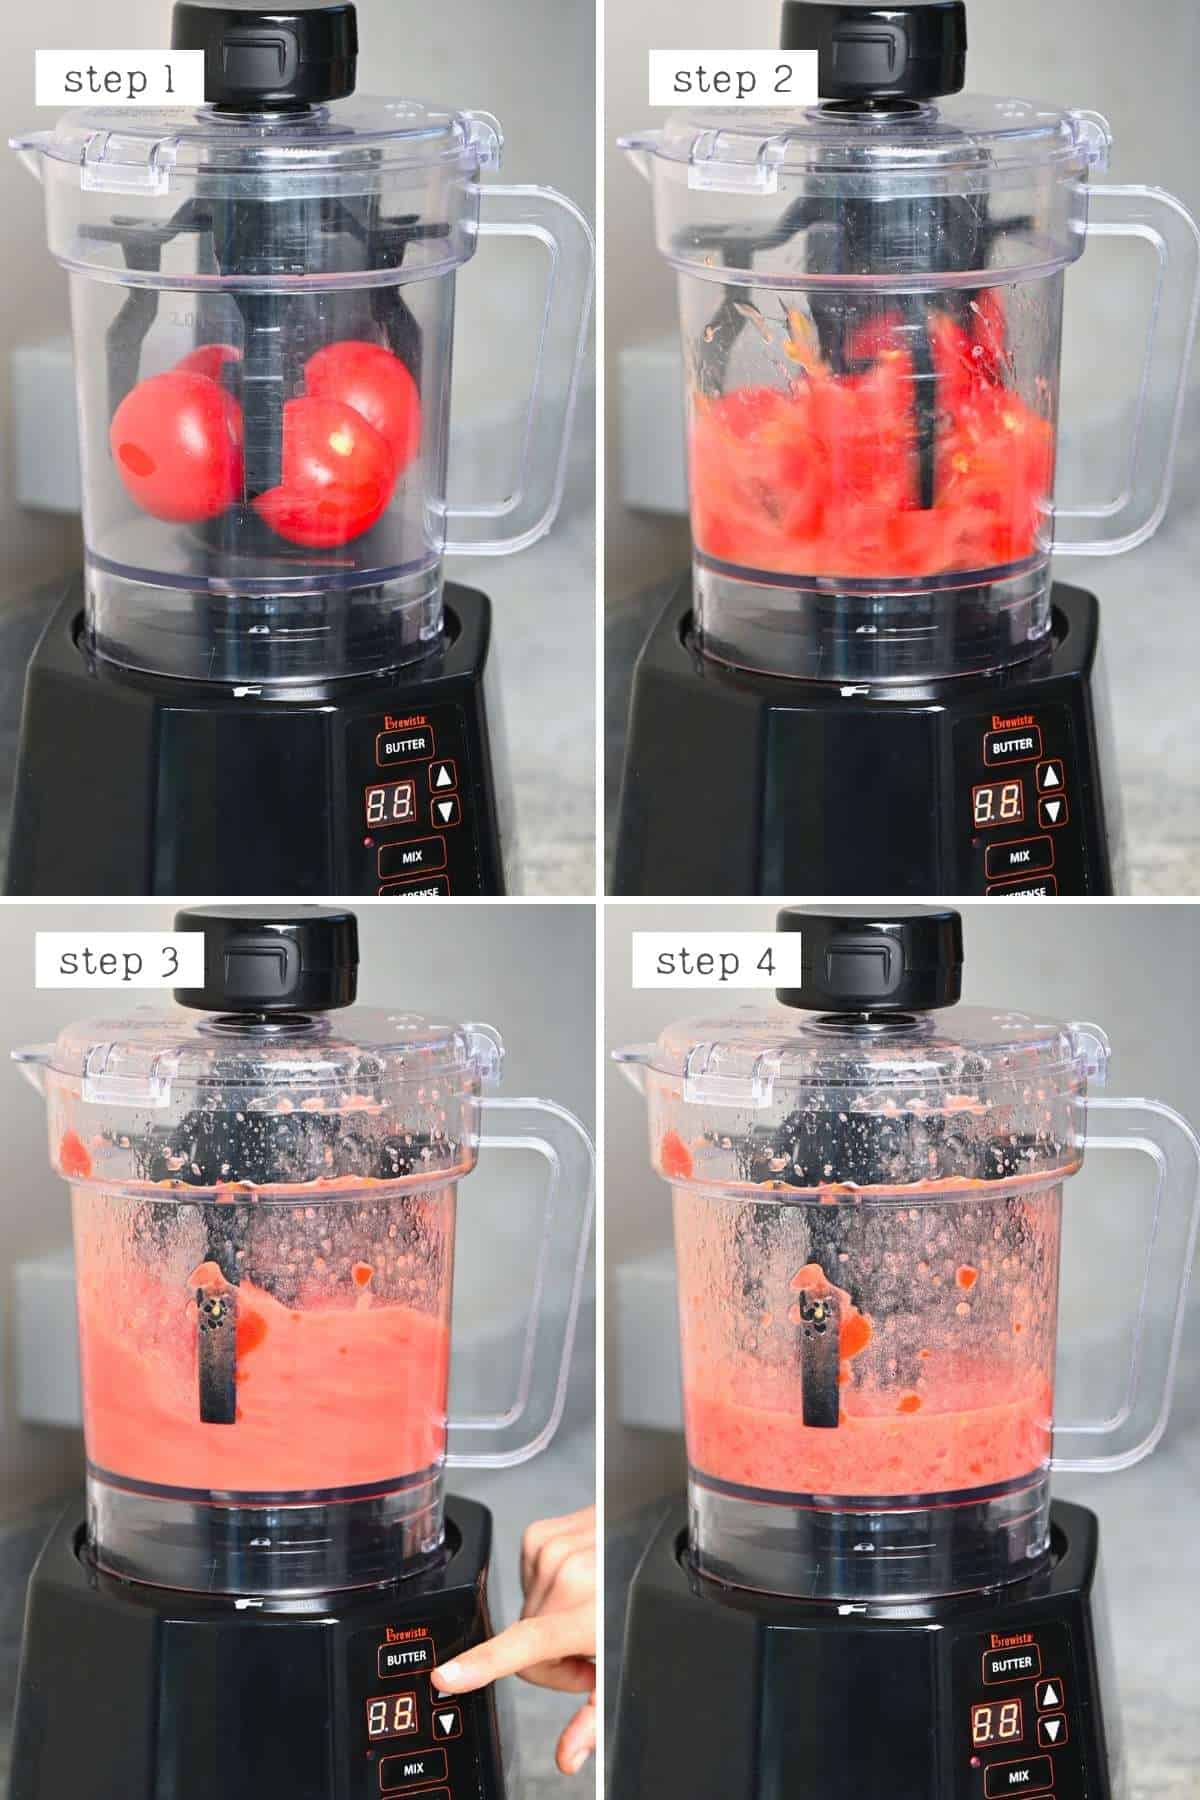 Juicing tomatoes in a blender